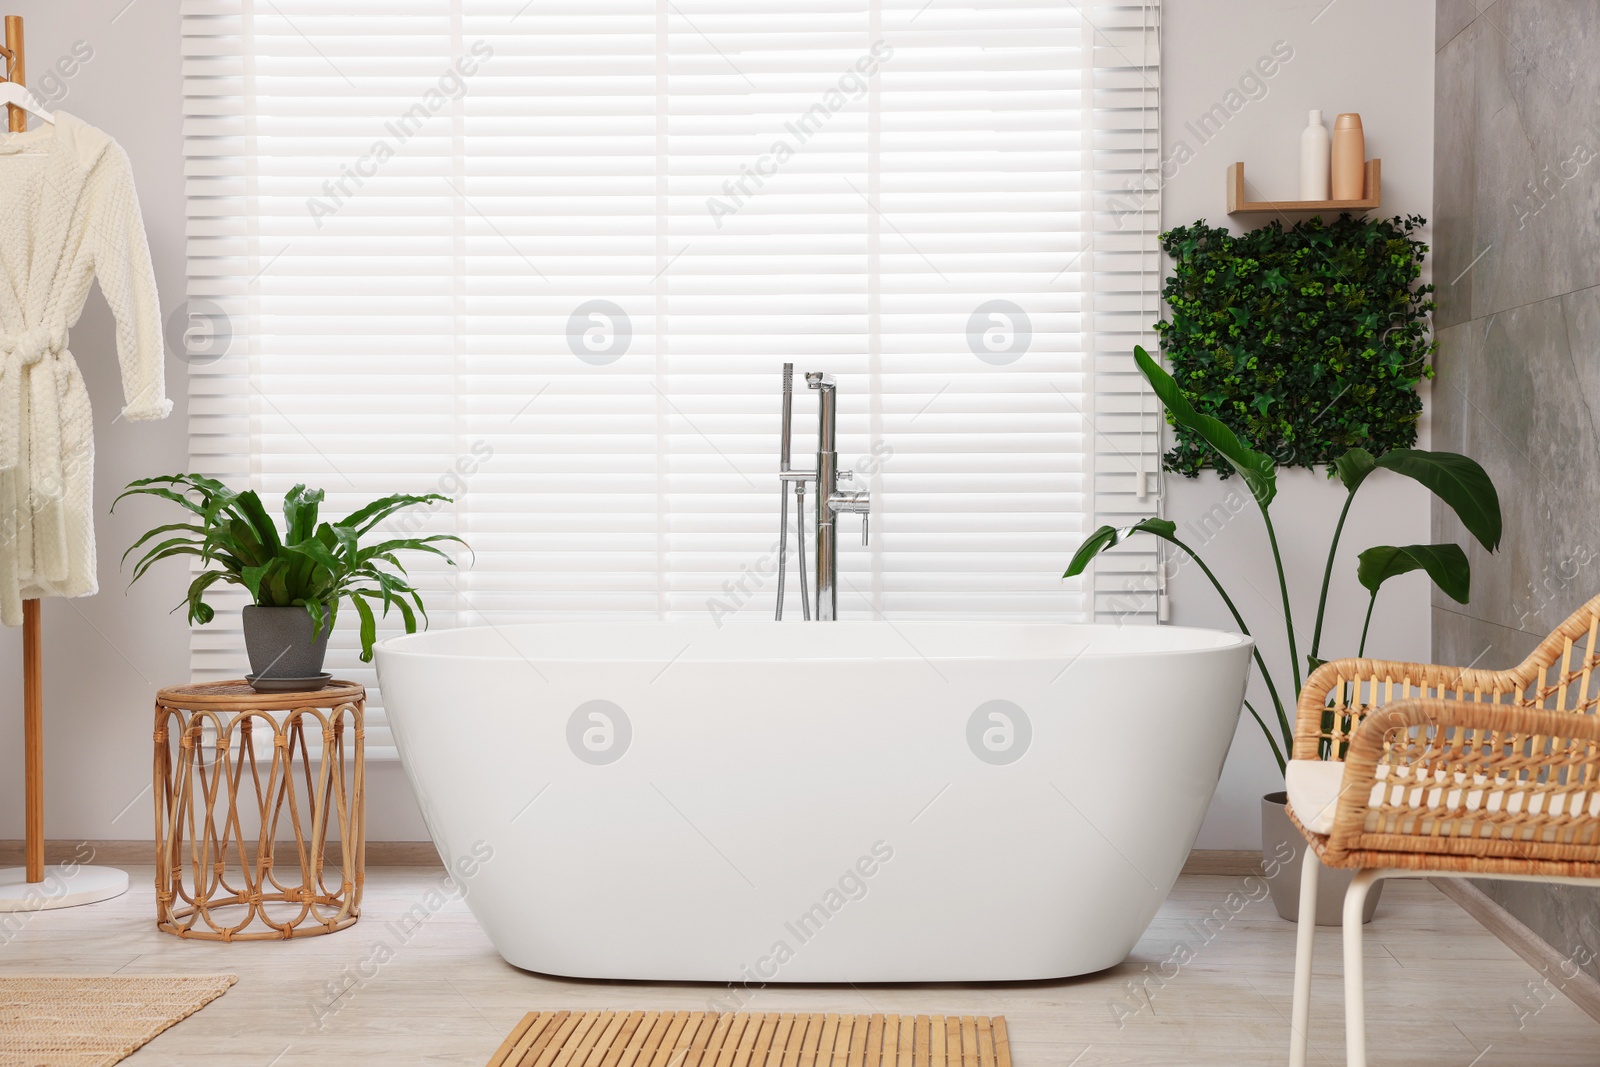 Photo of Green artificial plants and white tub in bathroom